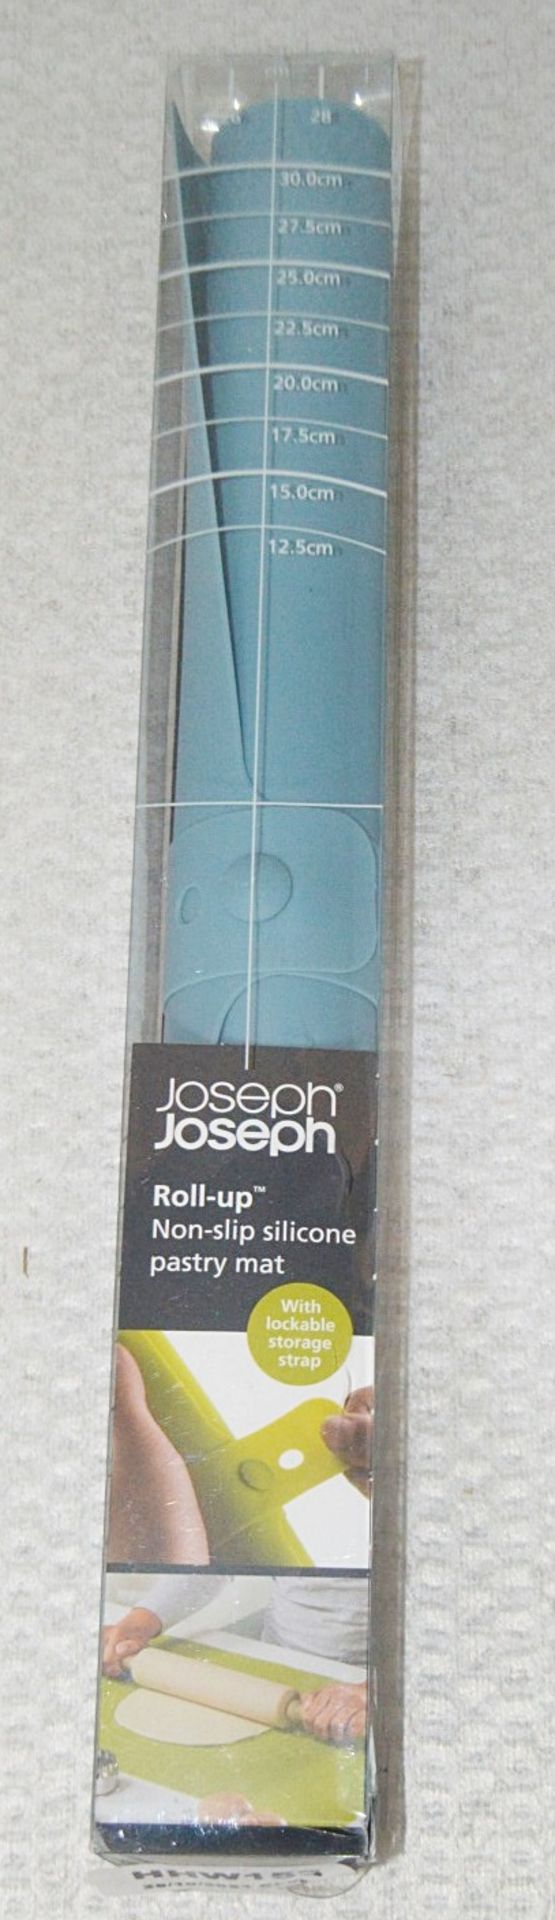 1 x JOSEPH JOSEPH Roll-up Silicone Pastry Mat - Ref: HHW153/NOV21/WH2/C3 - CL987 - Location: - Image 2 of 2